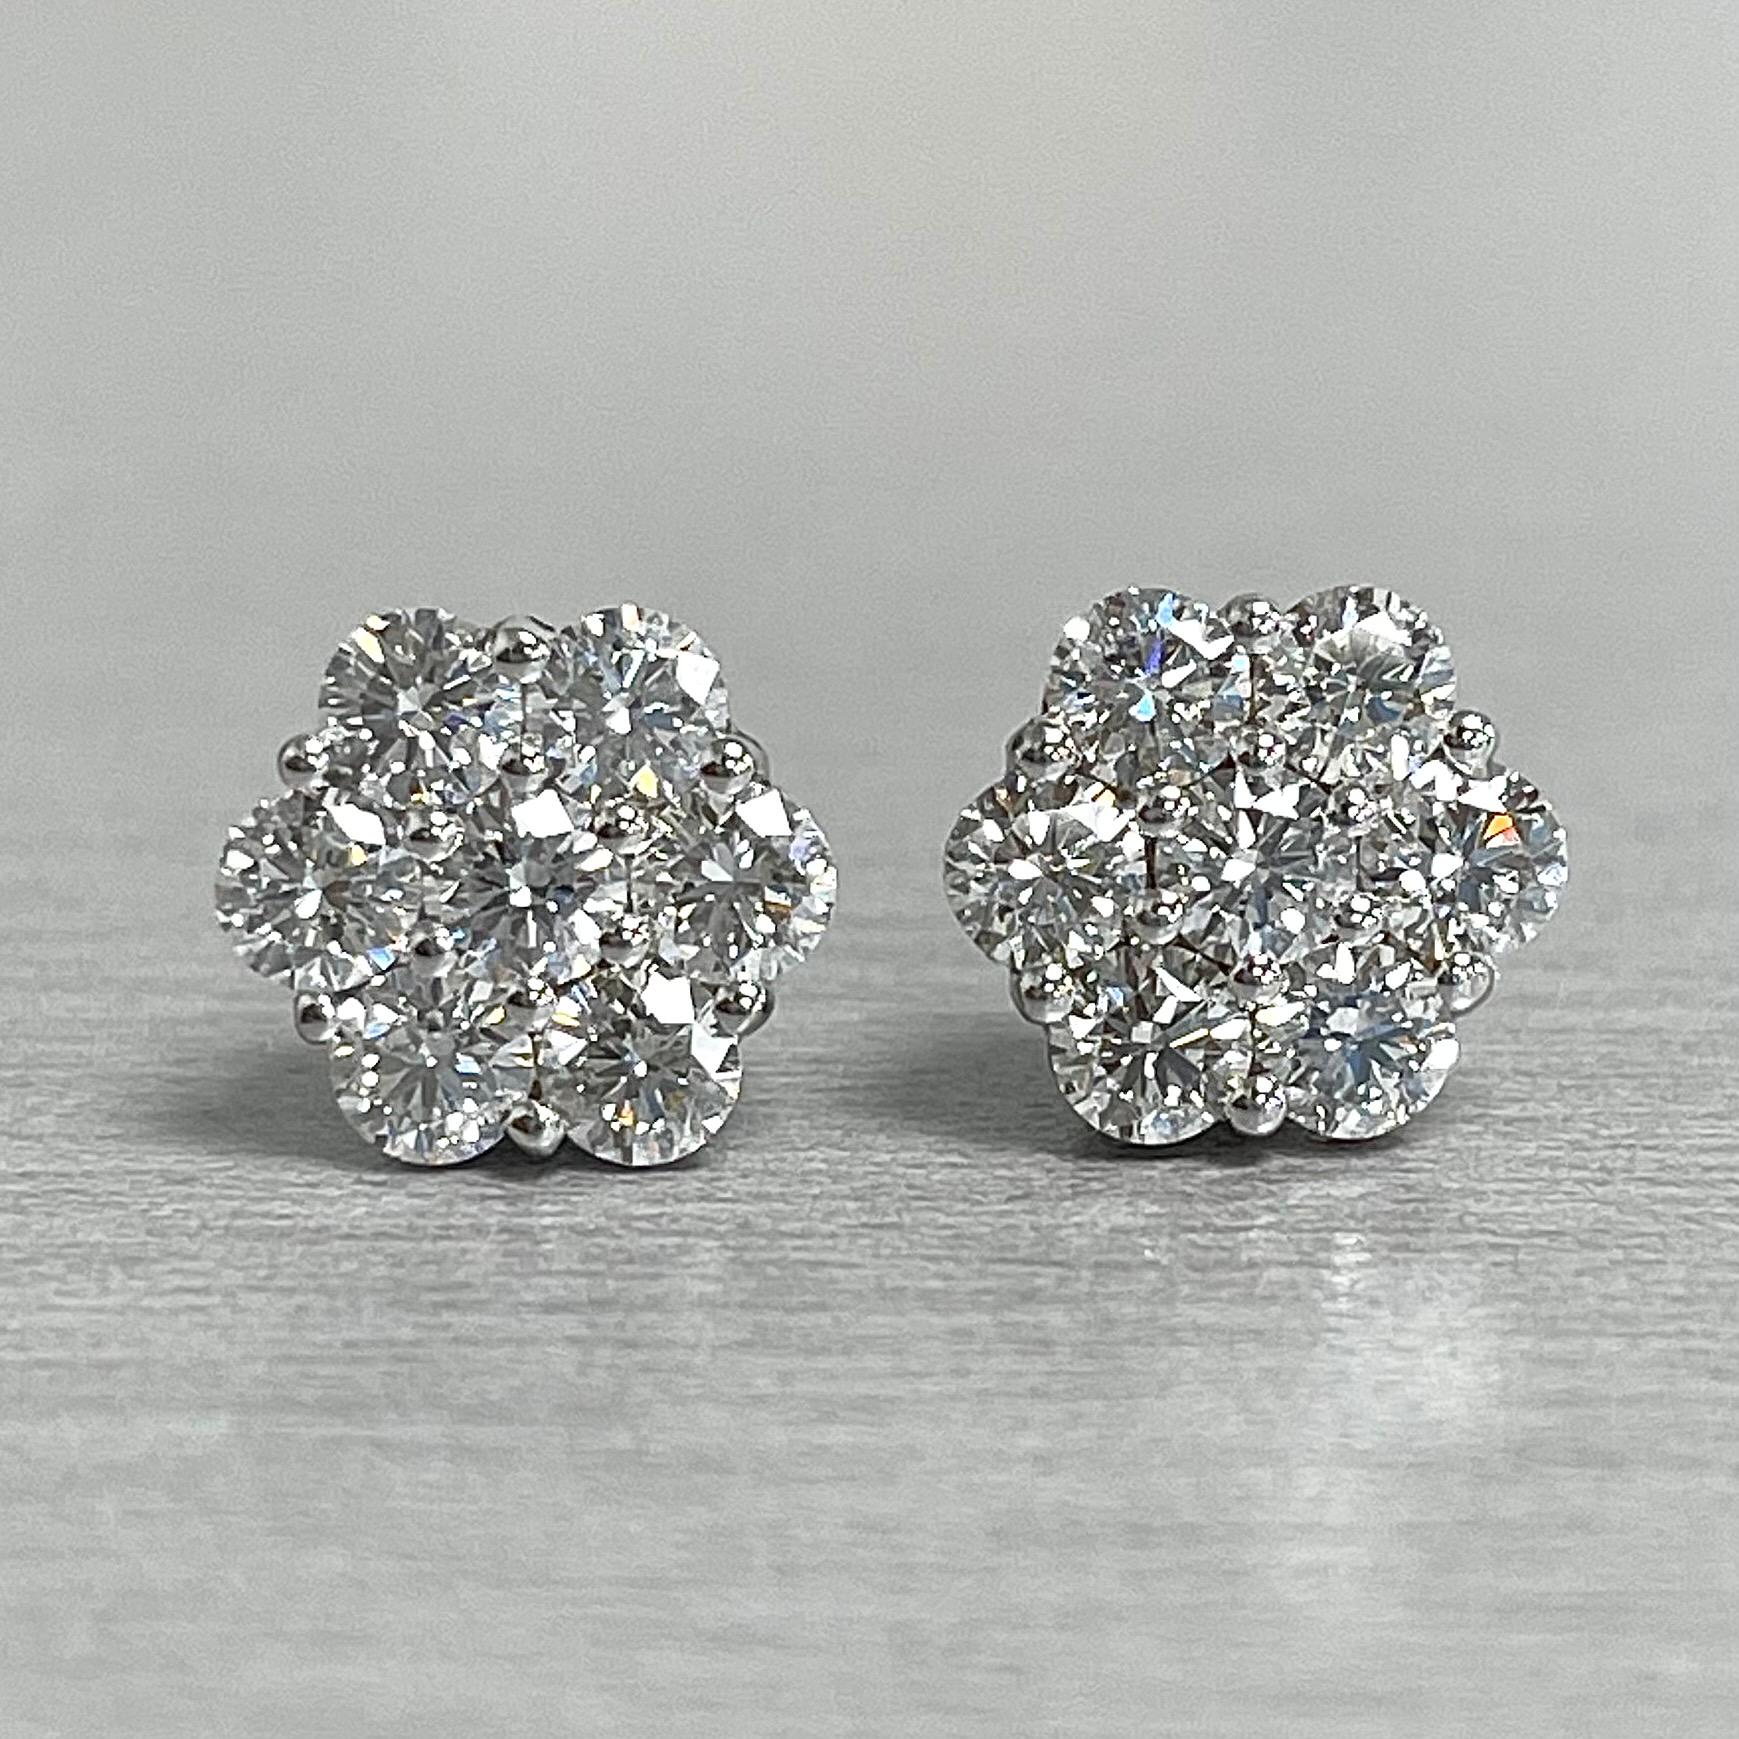 Diamond studs are a signature everyday piece of jewelry. They are a classic and elegant wear that is suitable for anywhere anytime.

Diamonds Shape: Round
Diamond Weight: 1.42 ct 
Diamond Color: H
Diamond Clarity: VVS - VS (Very Very Slightly